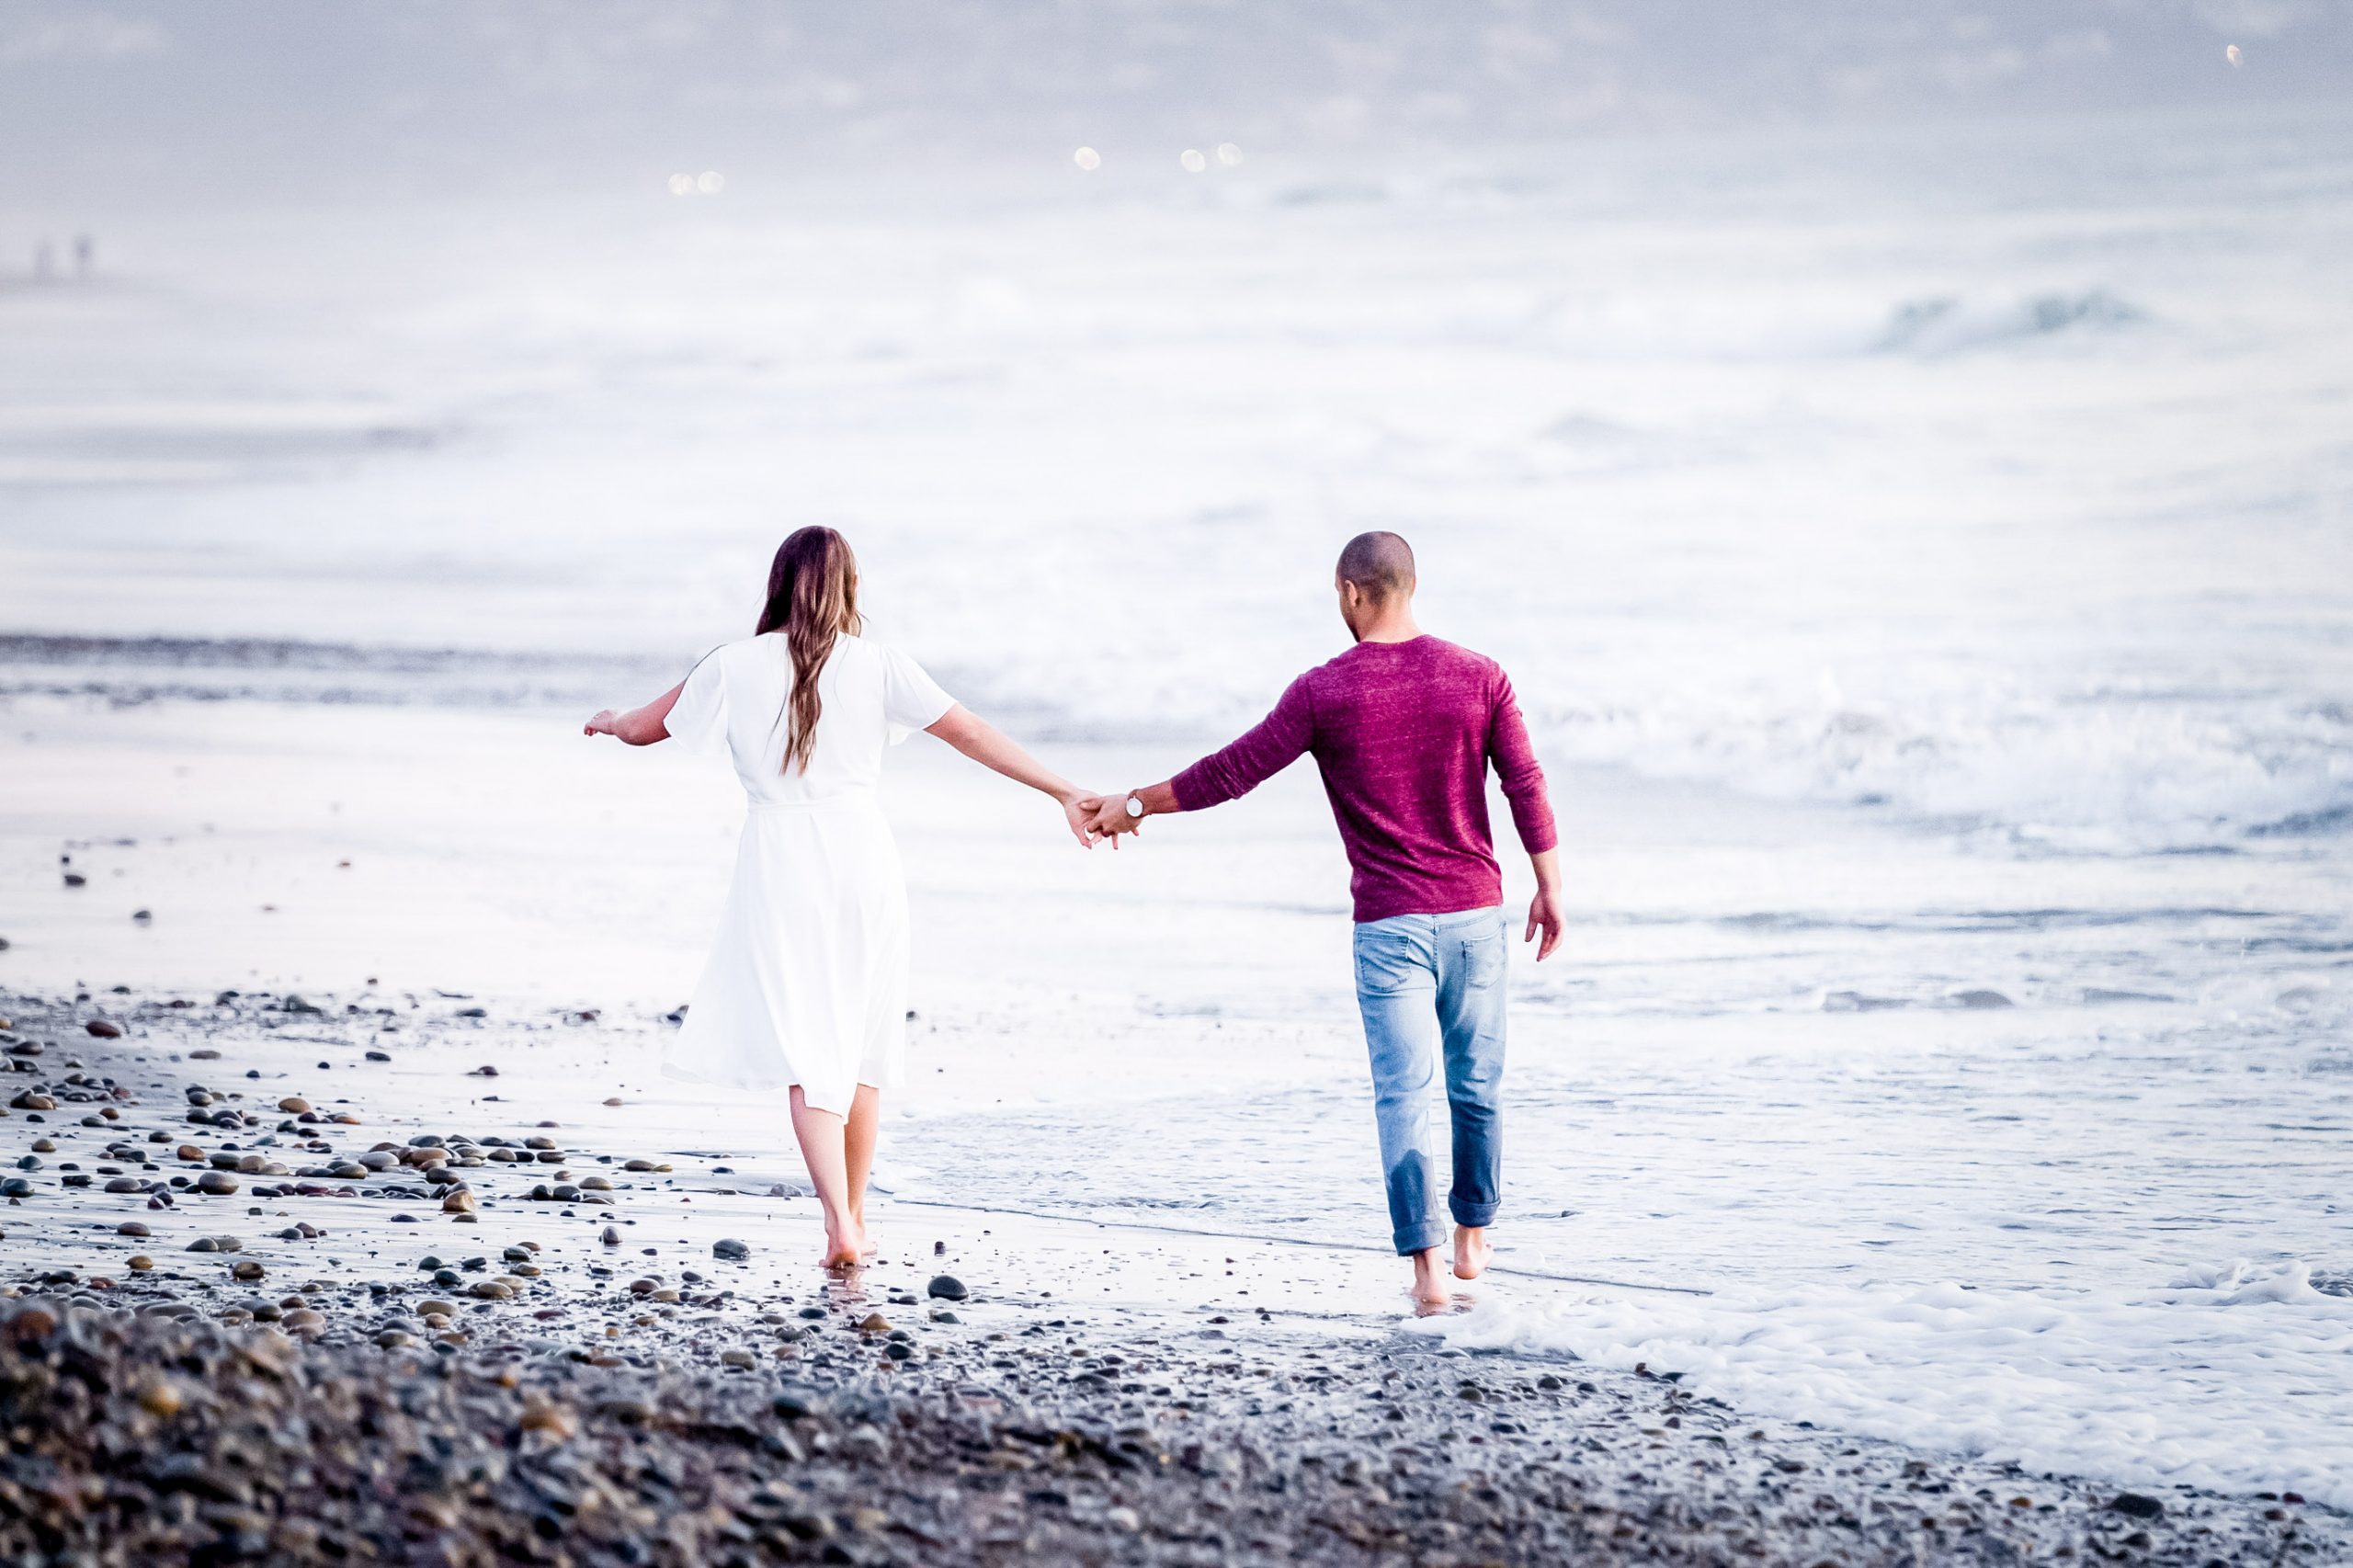 Planning a summer engagement? Here are some fun summer engagement photo session ideas to make the experience worthwhile!